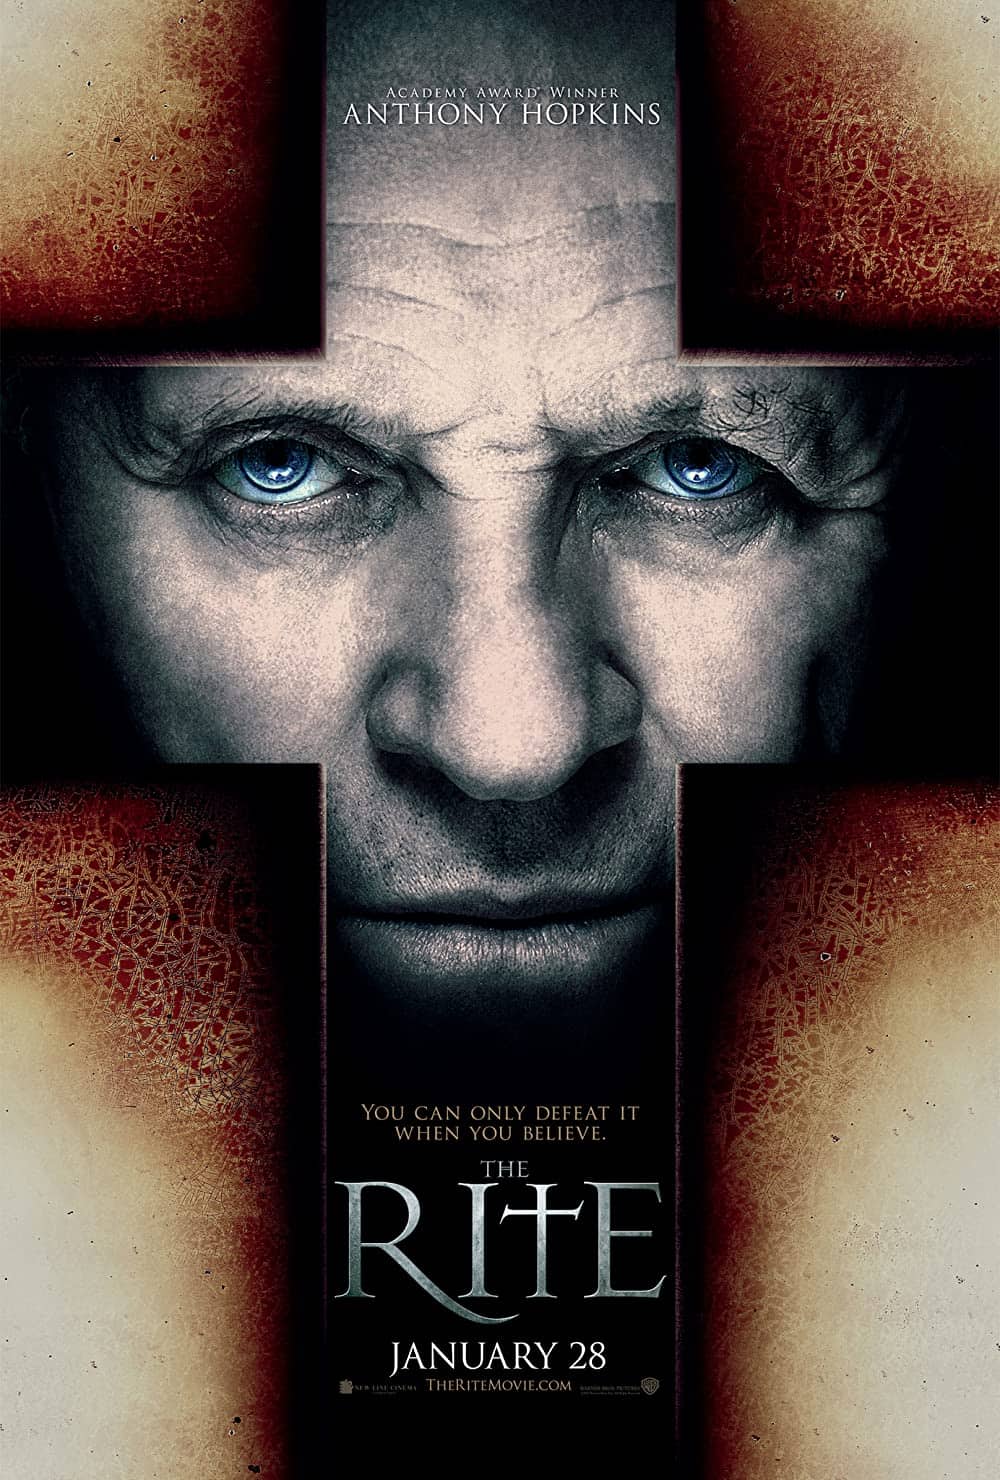 The Rite (2011) Best Exorcism Movies You Can't Miss